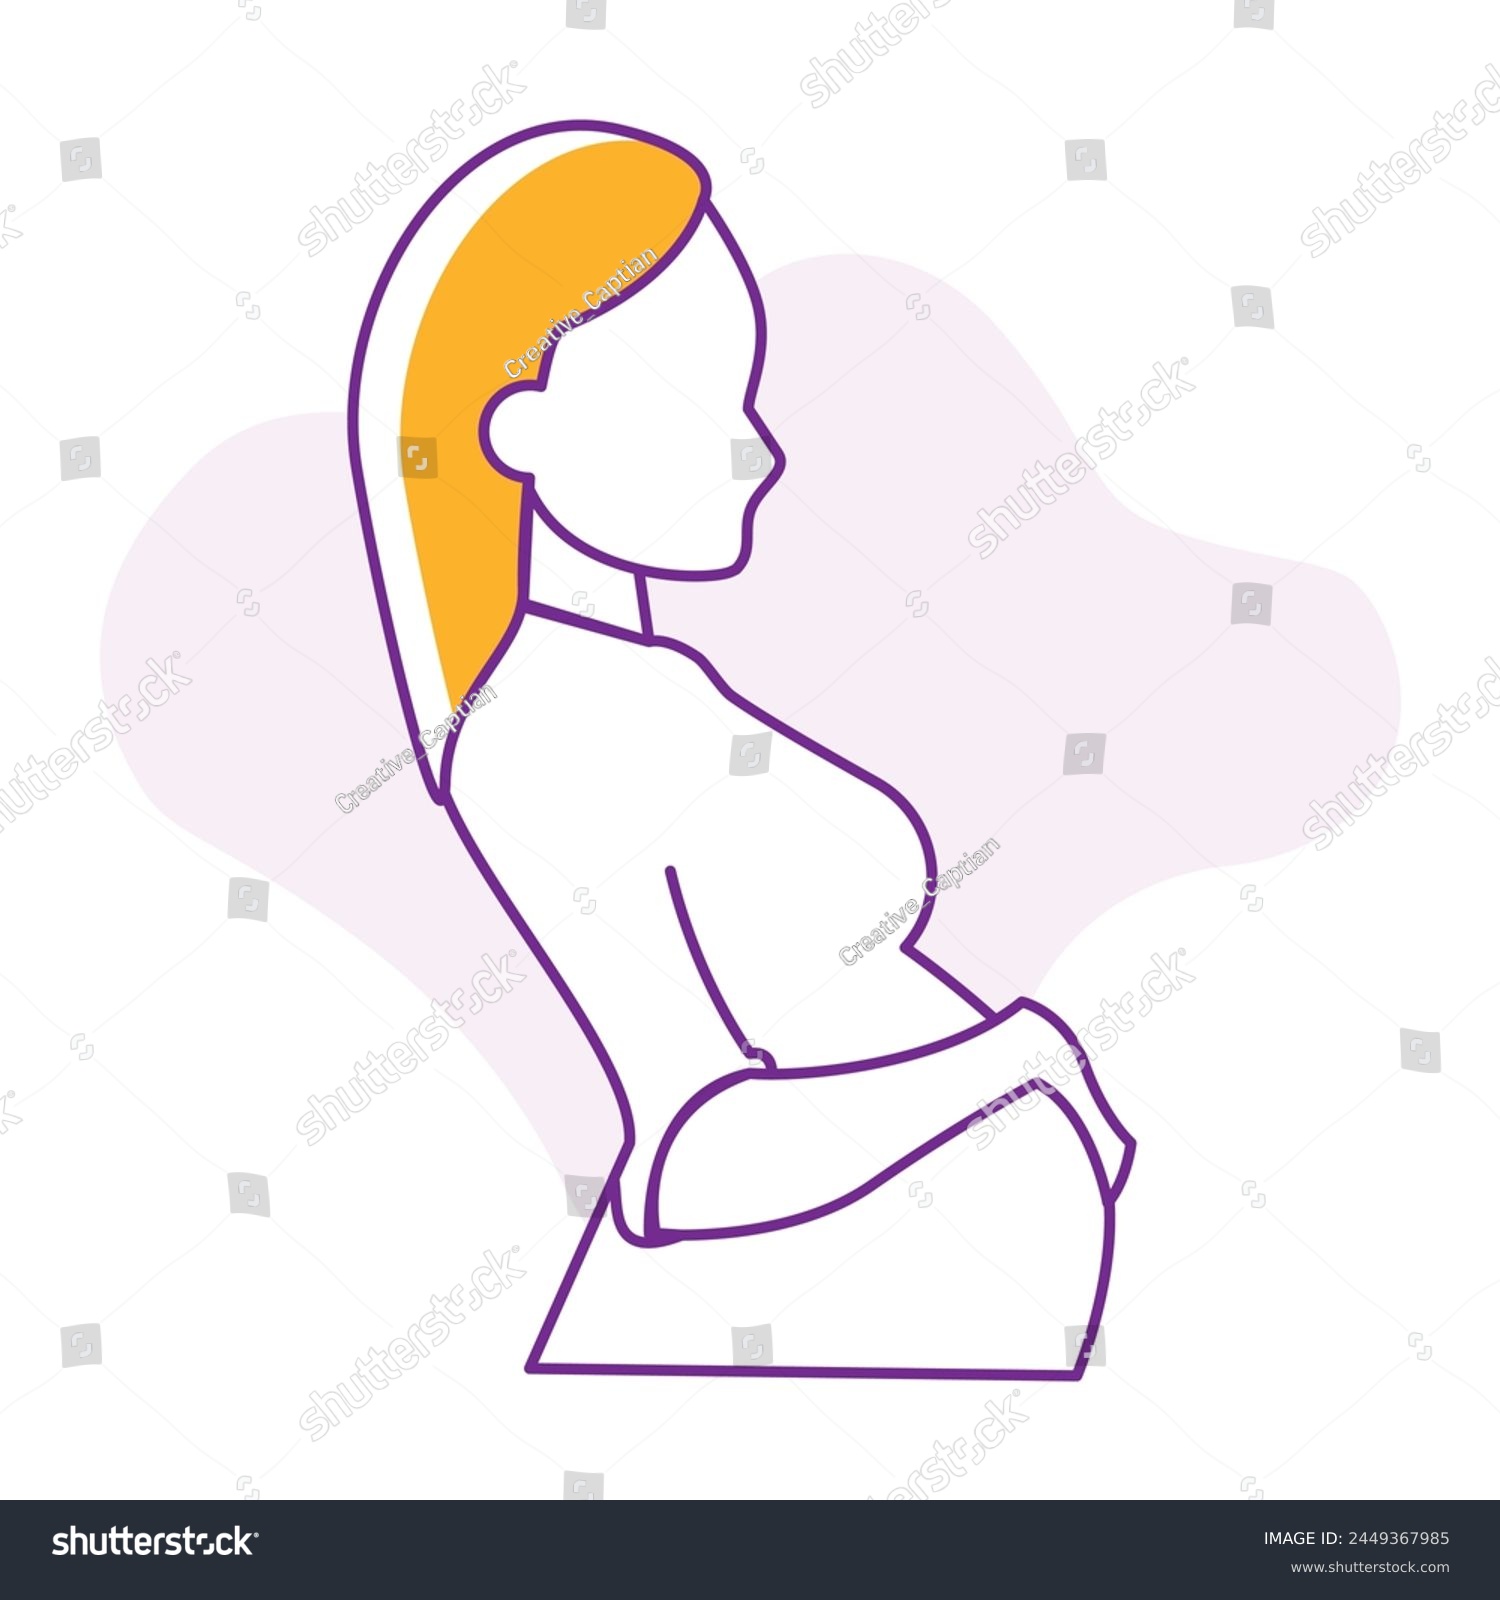 SVG of Implement supportive belly panels for maternity wear innovation, offering pregnant individuals enhanced comfort and support during various activities. svg